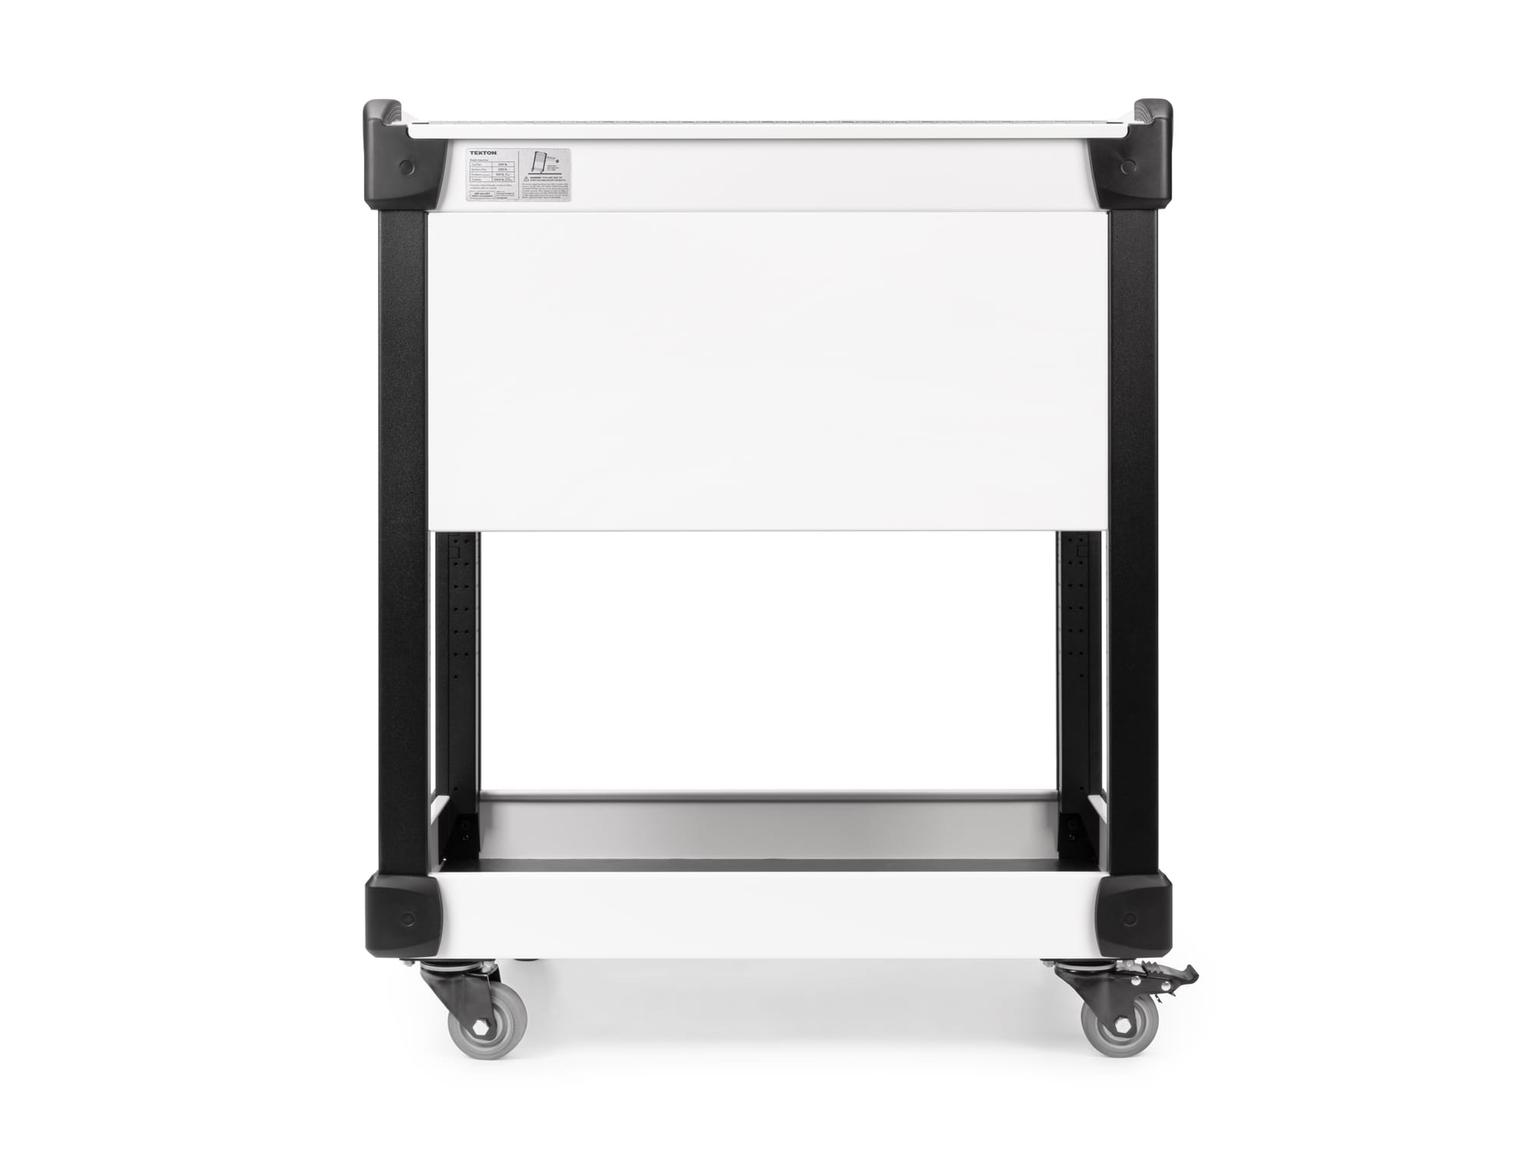 TEKTON ORG66305-T 37 Inch Tall 3-Drawer Tool Cart, White (31" W x 37" H x 21" D) - Solid Sides